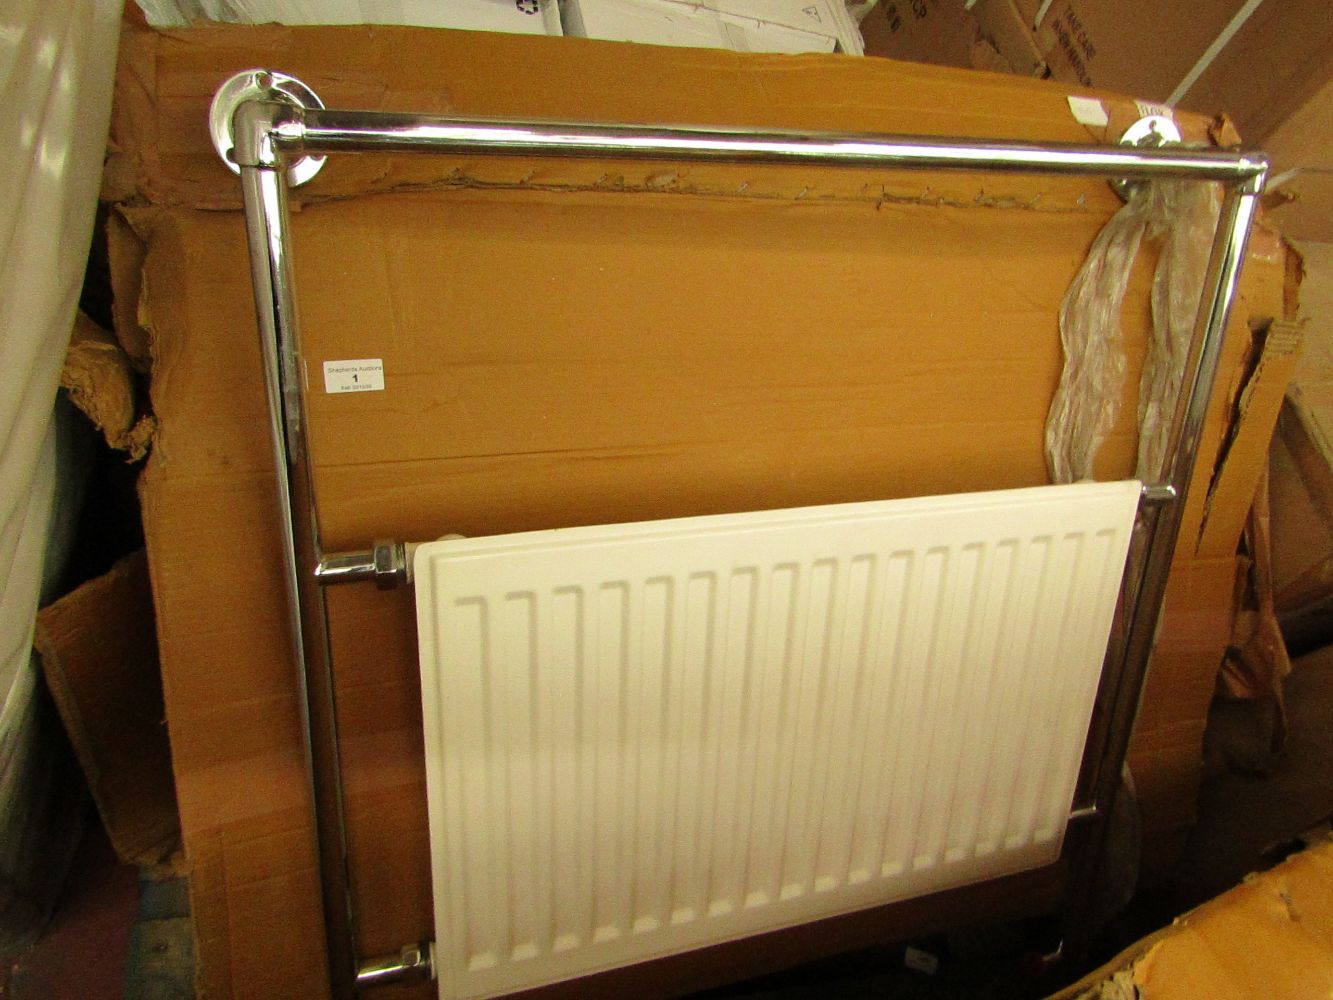 Bathroom and Radiator stock from Brands such as Roca, Old London and More